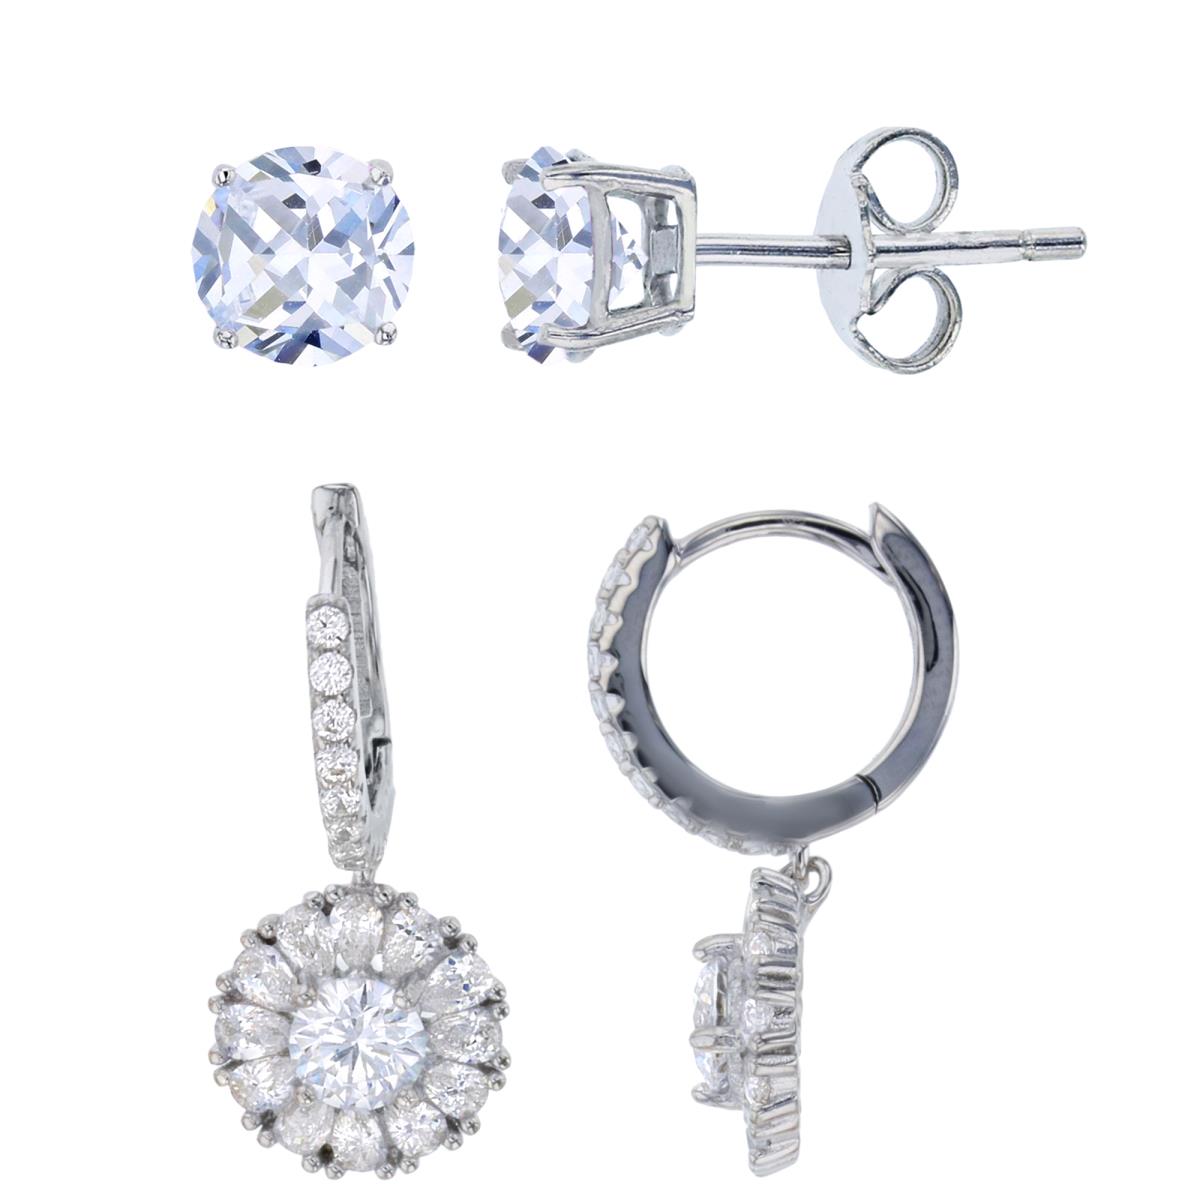 Sterling Silver Rhodium 5mm Rnd & PS White CZ Huggie & 5mm Rd Solitaire Stud Earring Set